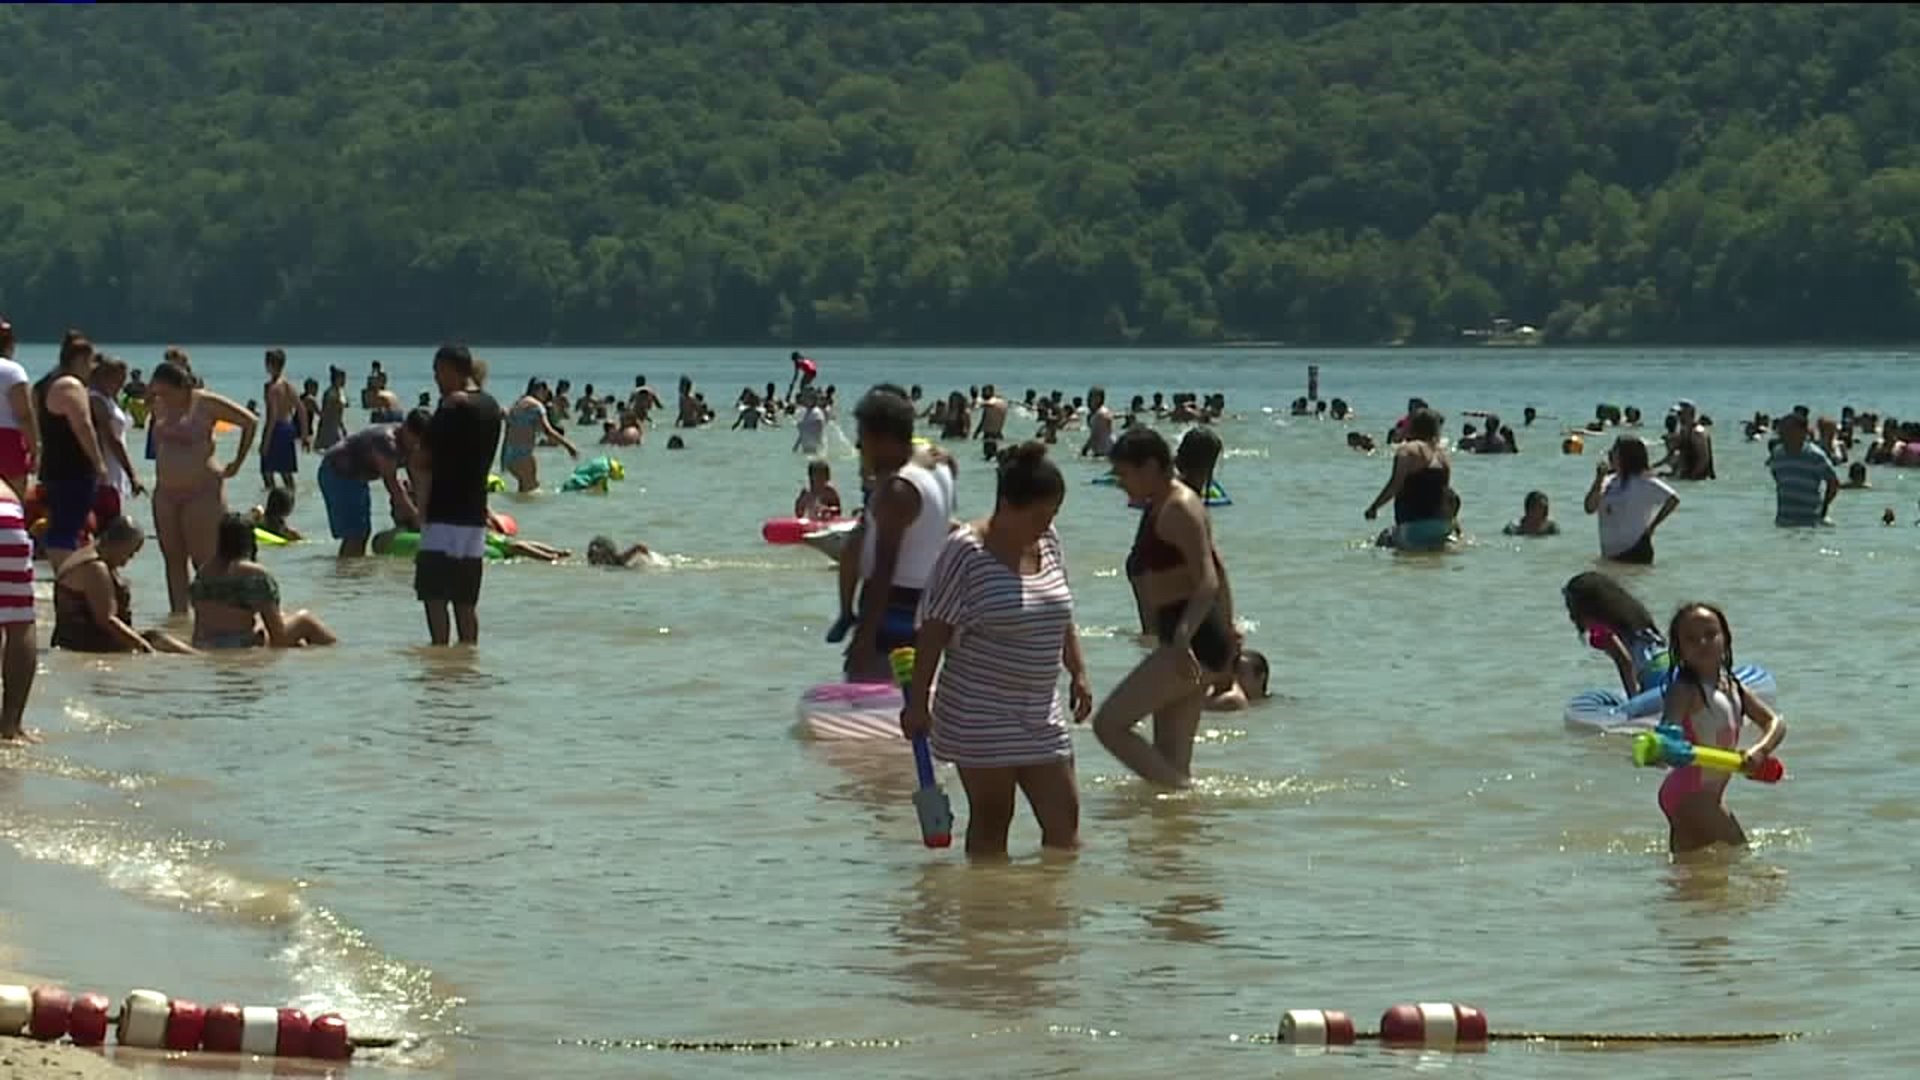 State Park Crowding Concerns During Hot Weather